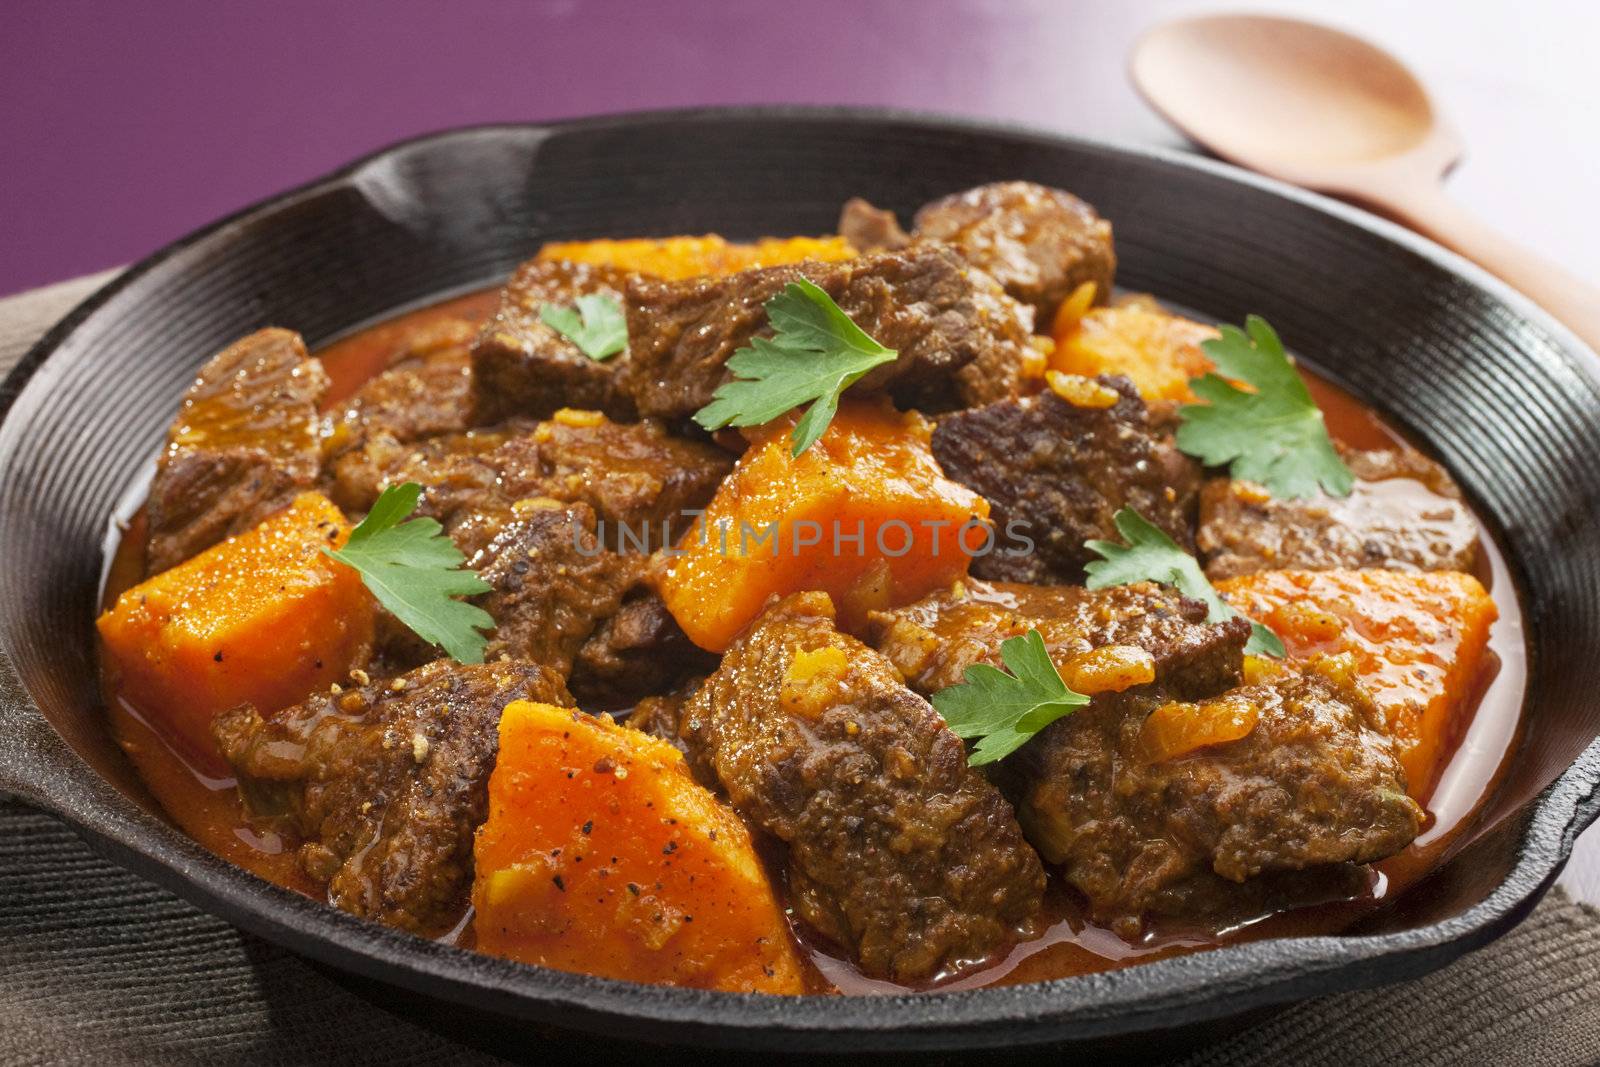 Stew Beef Tagine with Sweet Potato by Travelling-light